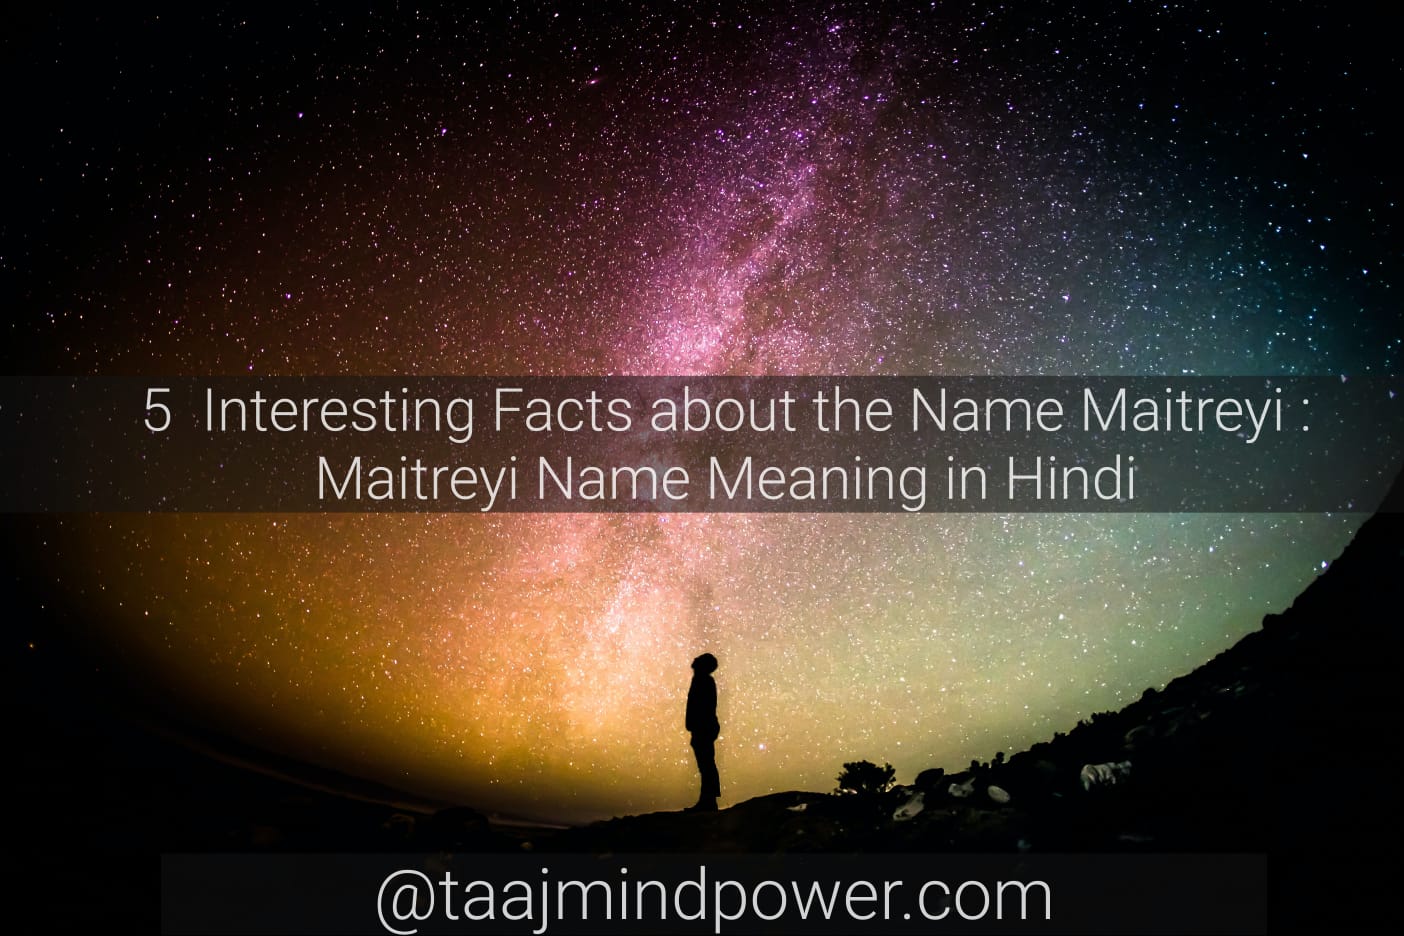 Maitreyi Name Meaning in Hindi